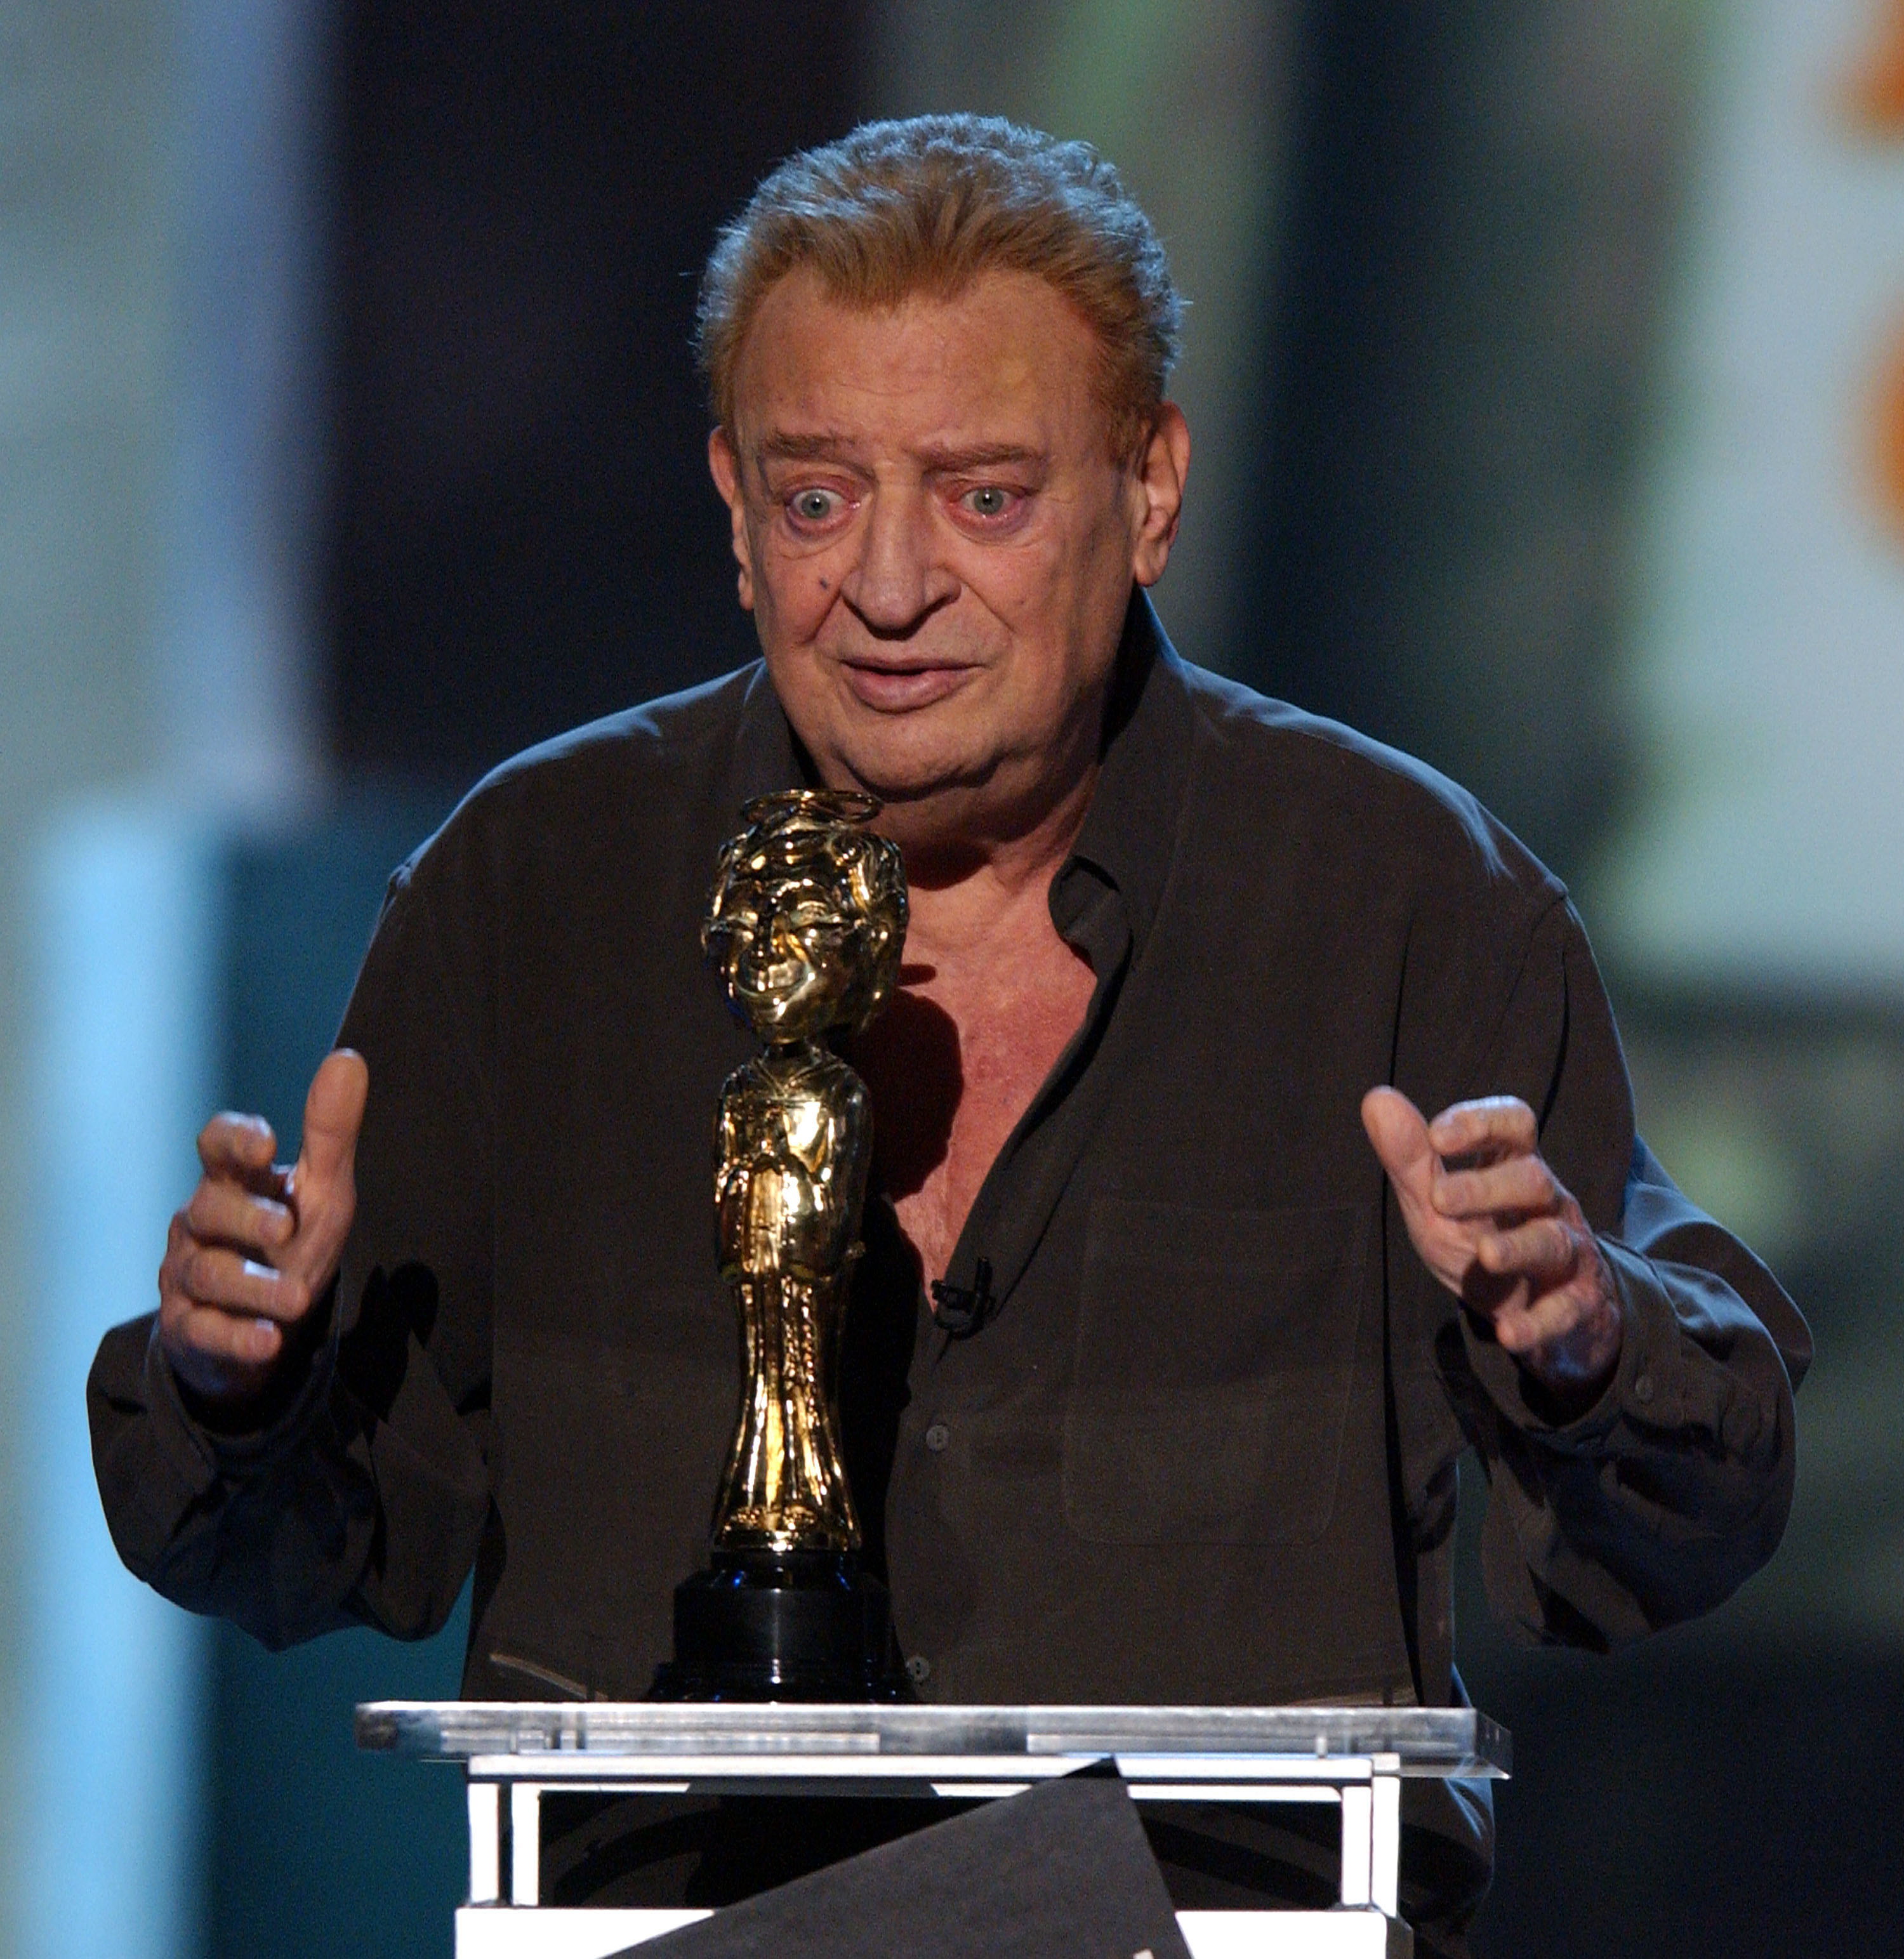 Rodney Dangerfield's Widow Wants to Paint Over His Unflattering